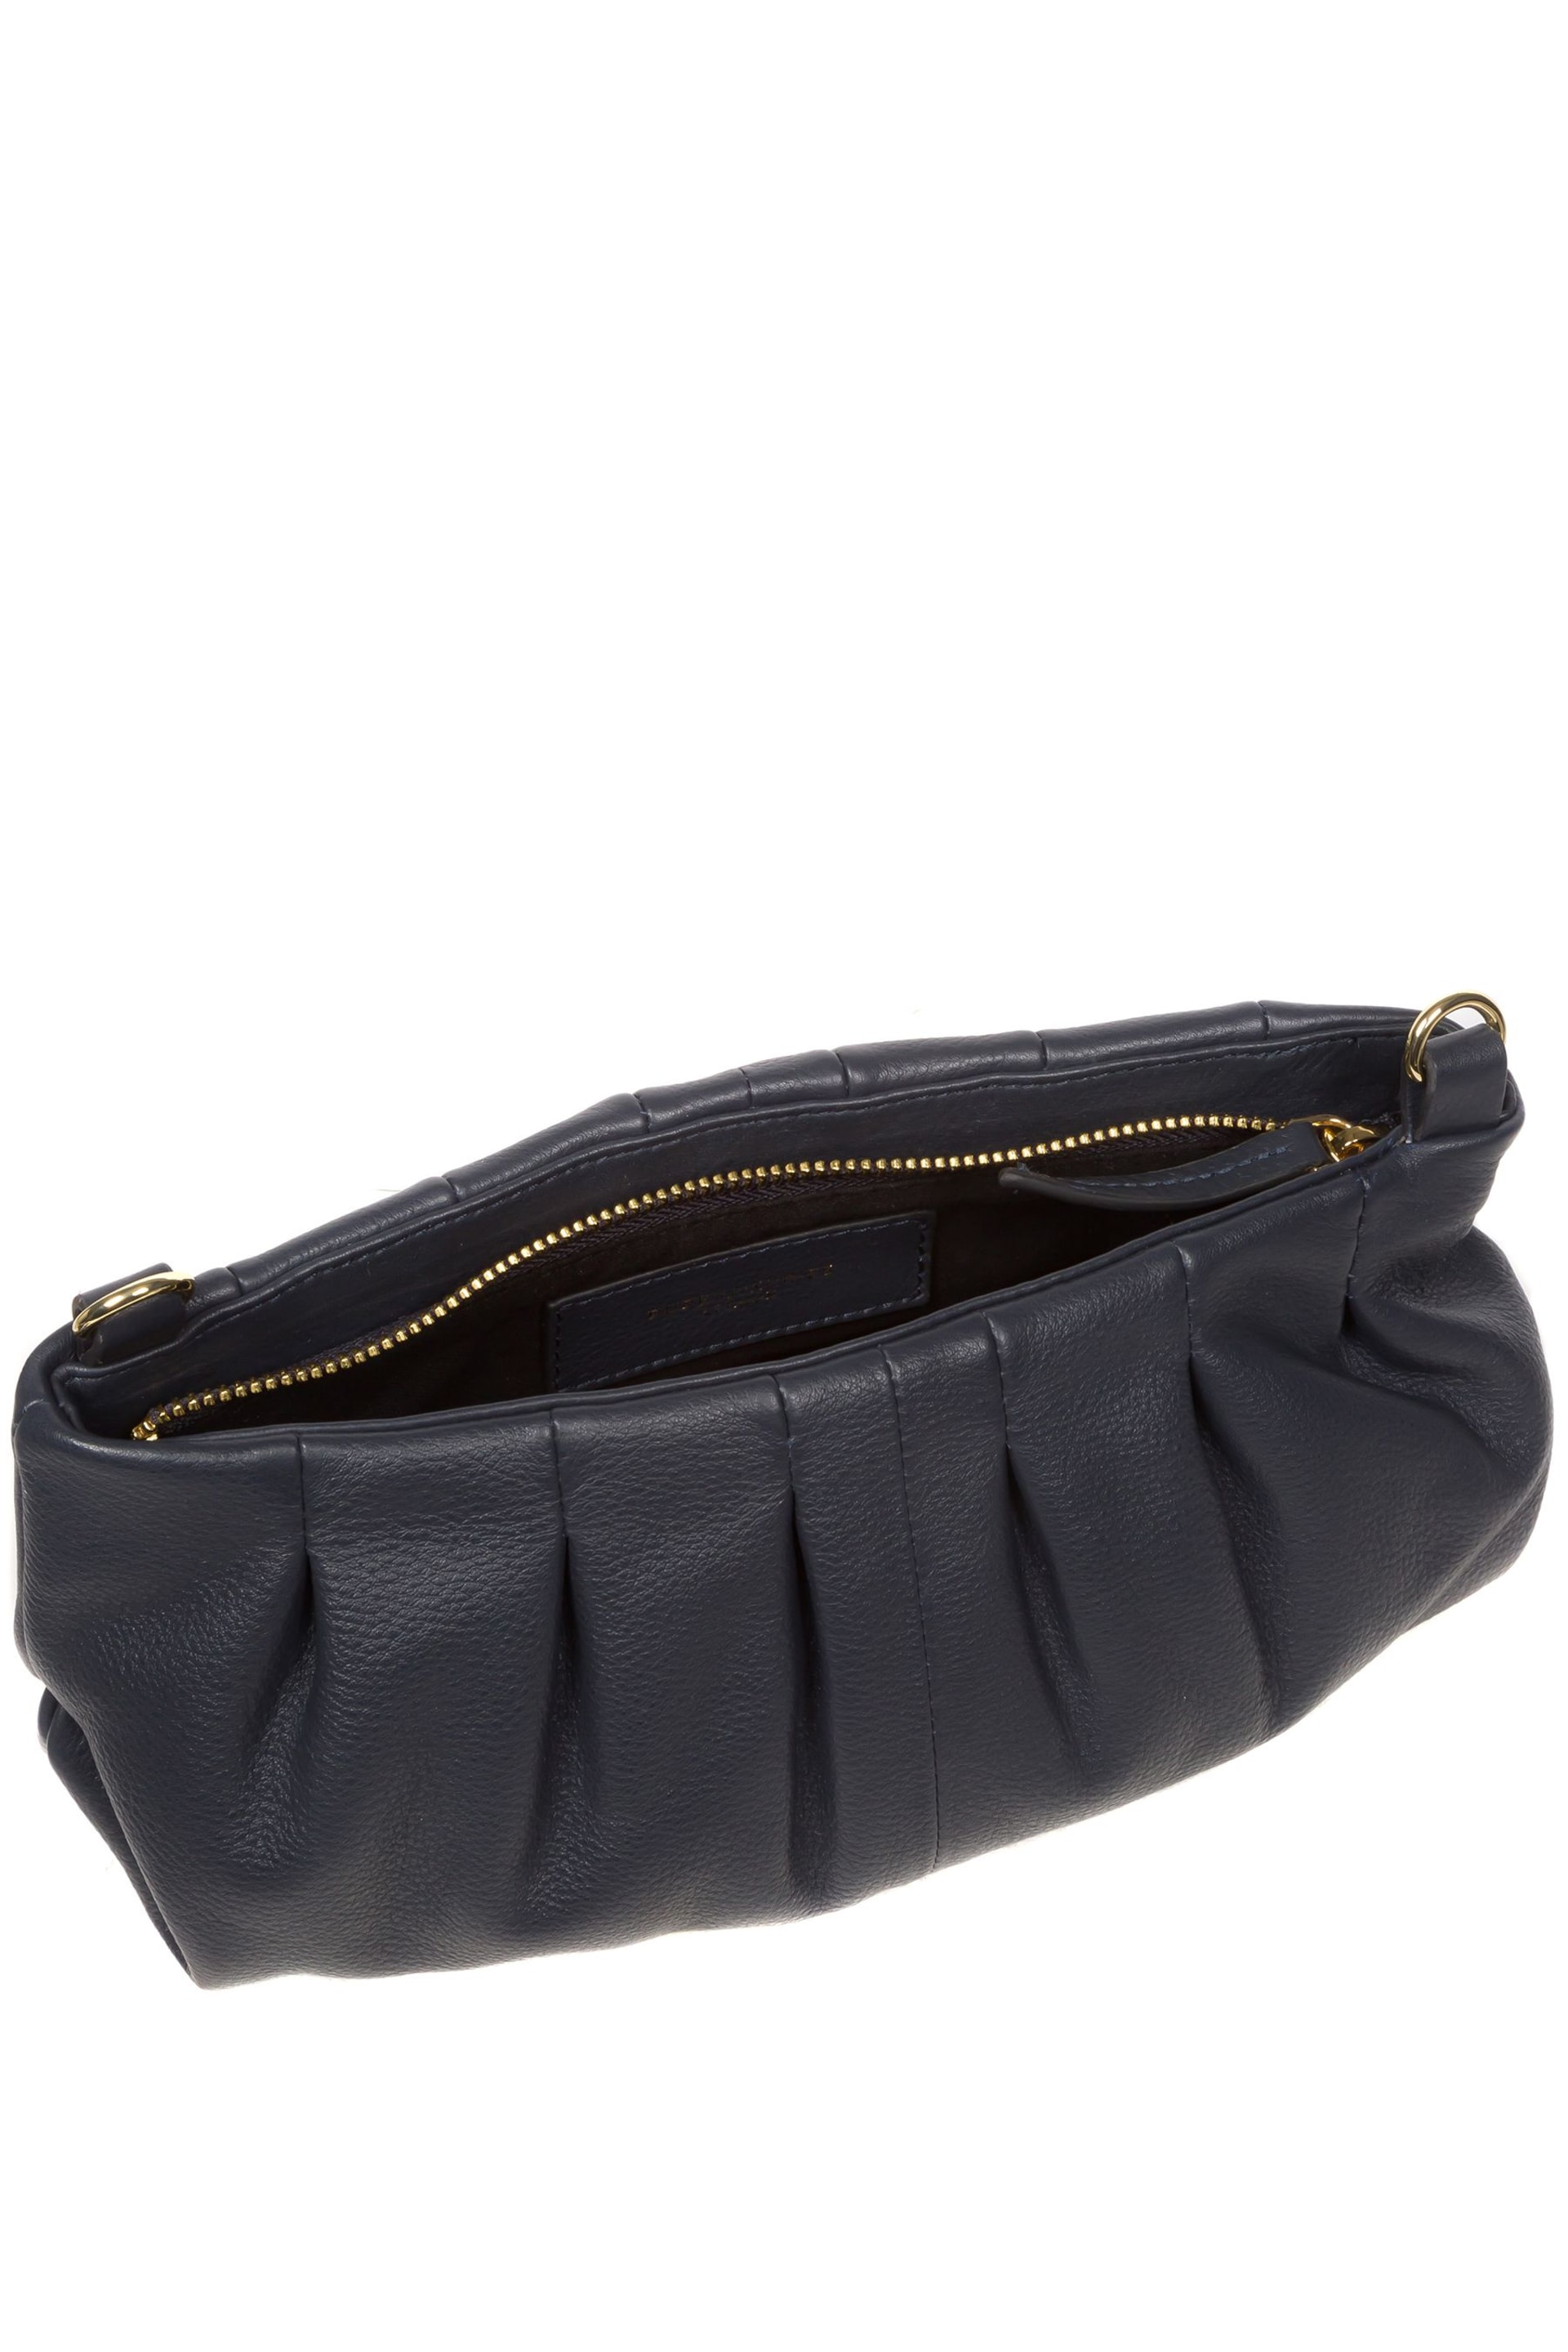 Pure Luxuries London Victoria Nappa Leather Grab Clutch Bag - Image 4 of 8